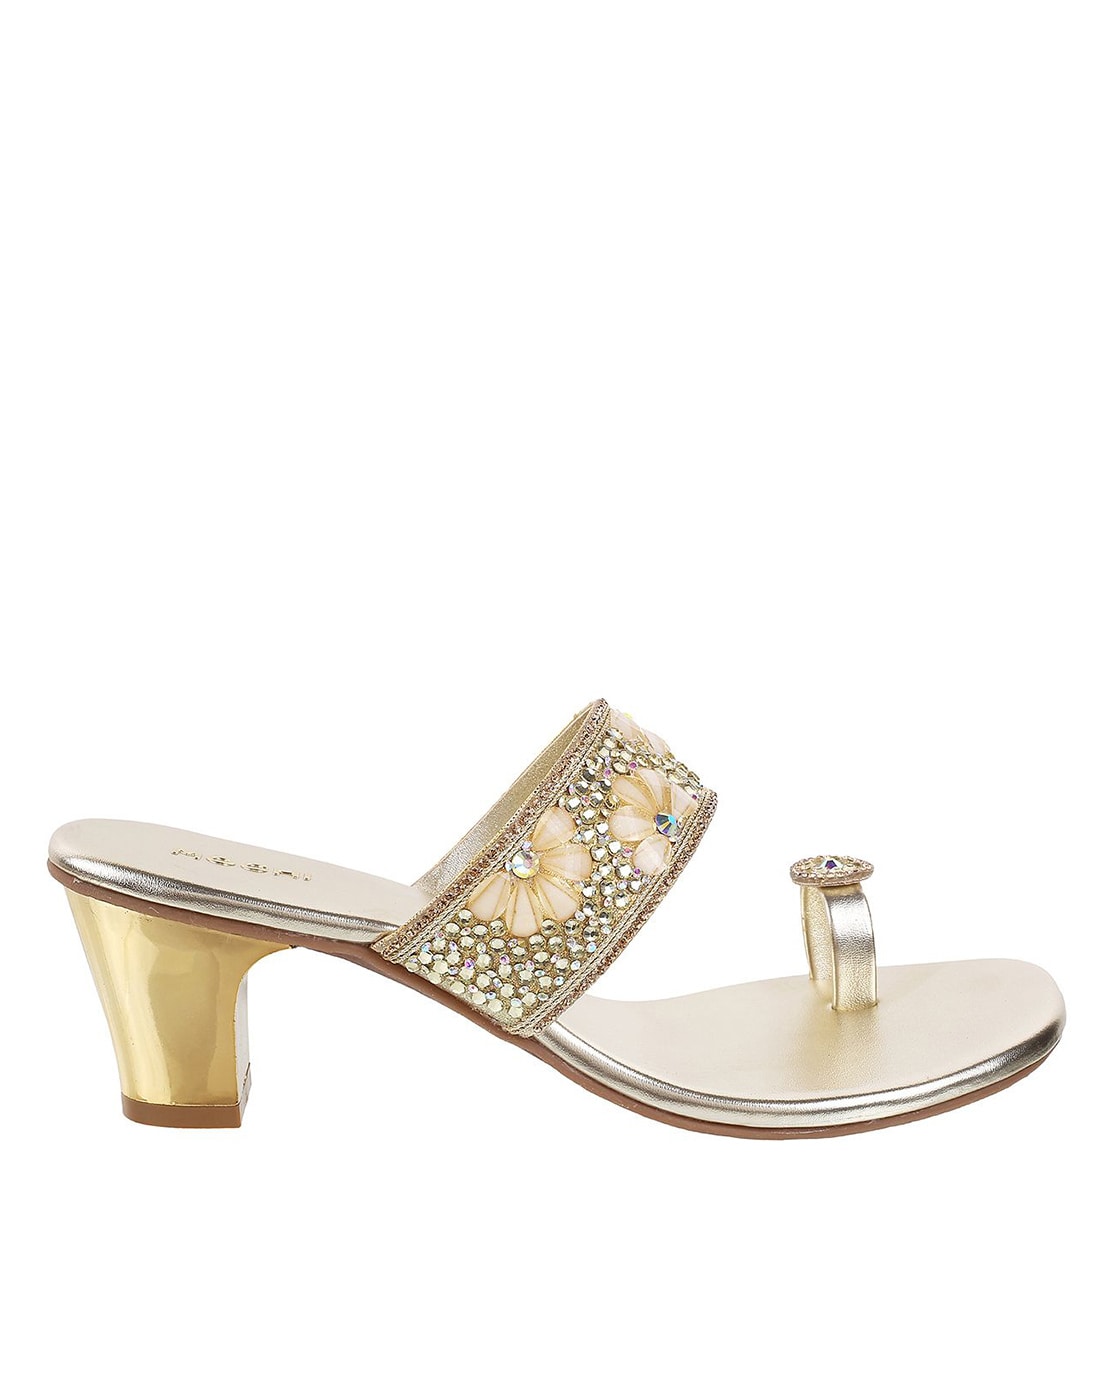 Glittery Block Heel Sandals with Ankle Strap | David's Bridal